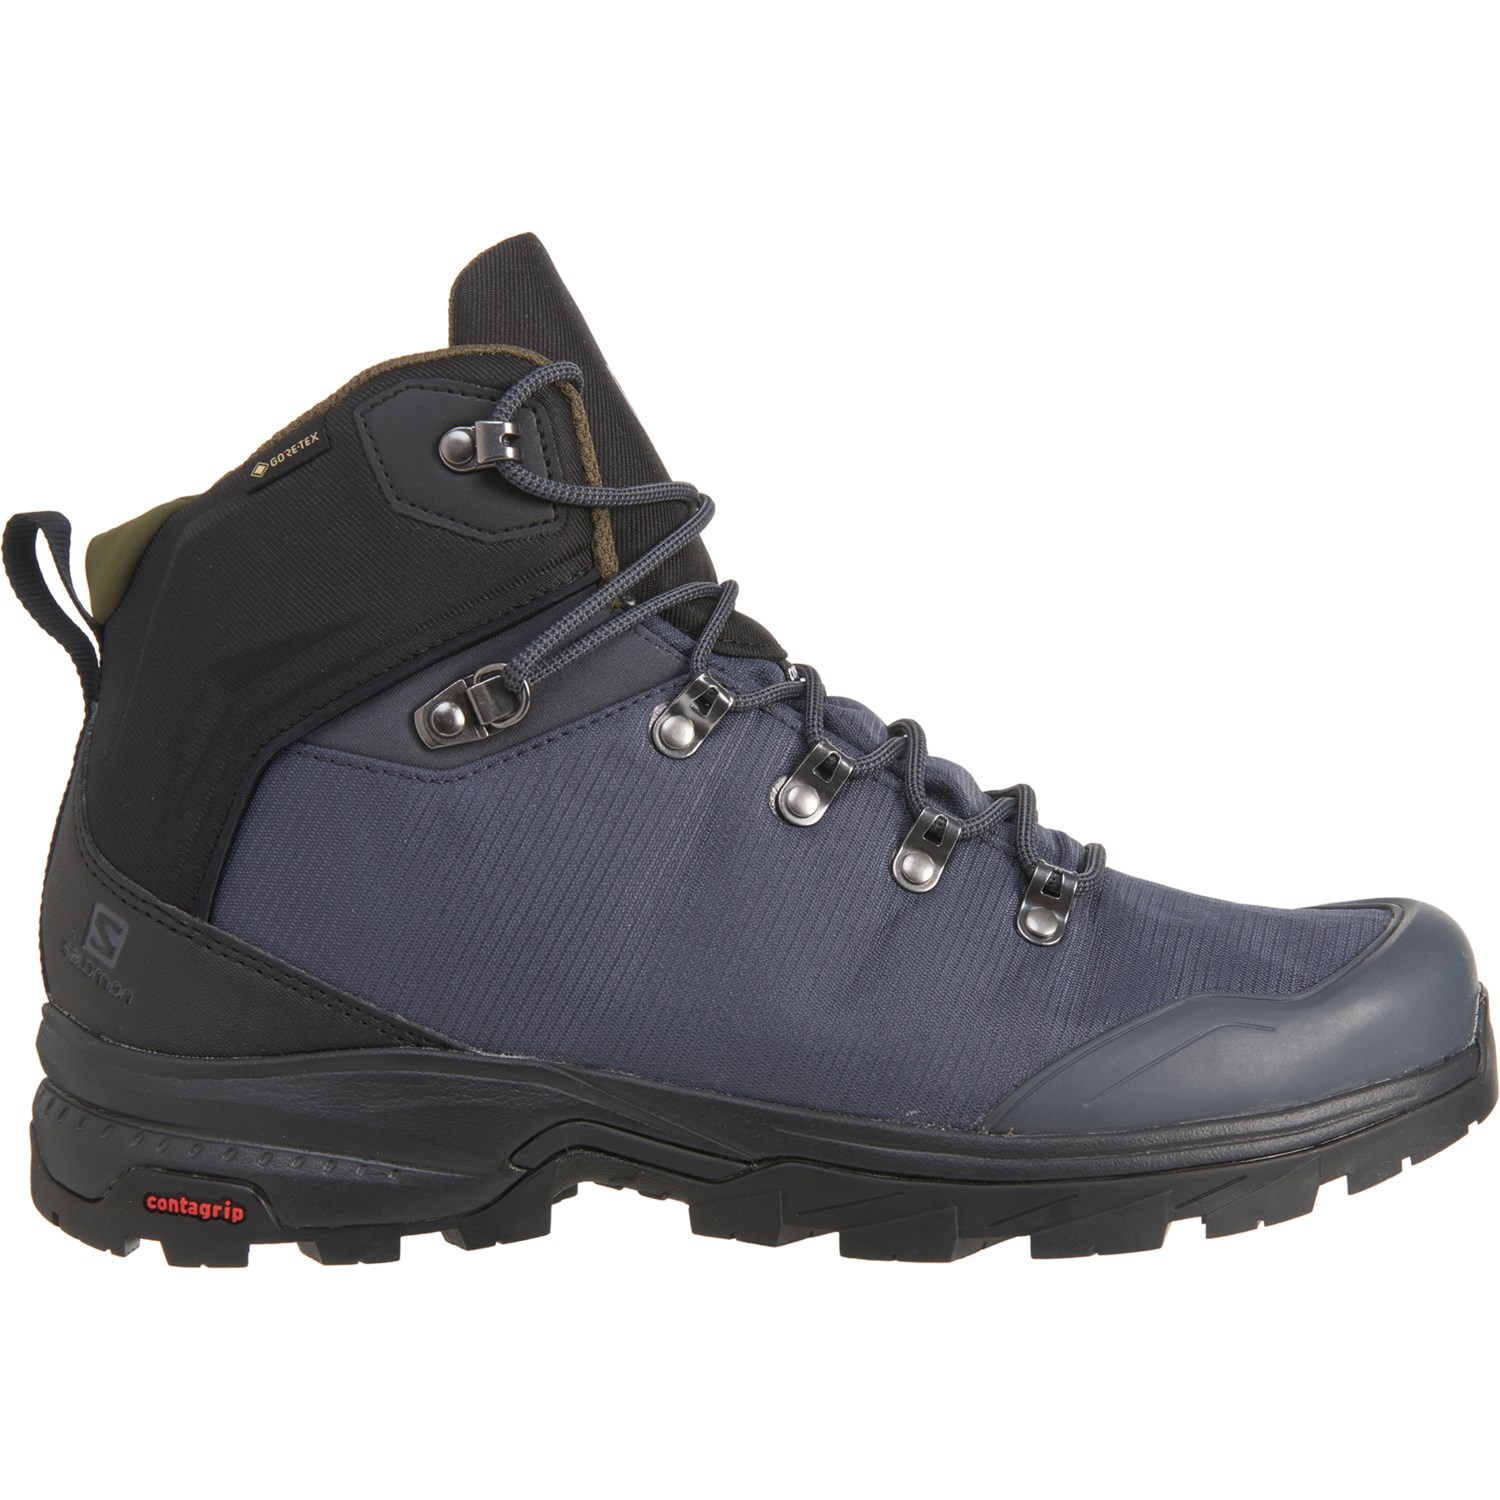 Salomon Outback 500 Gore-Tex® Hiking Boots (For Men) - Save 28%